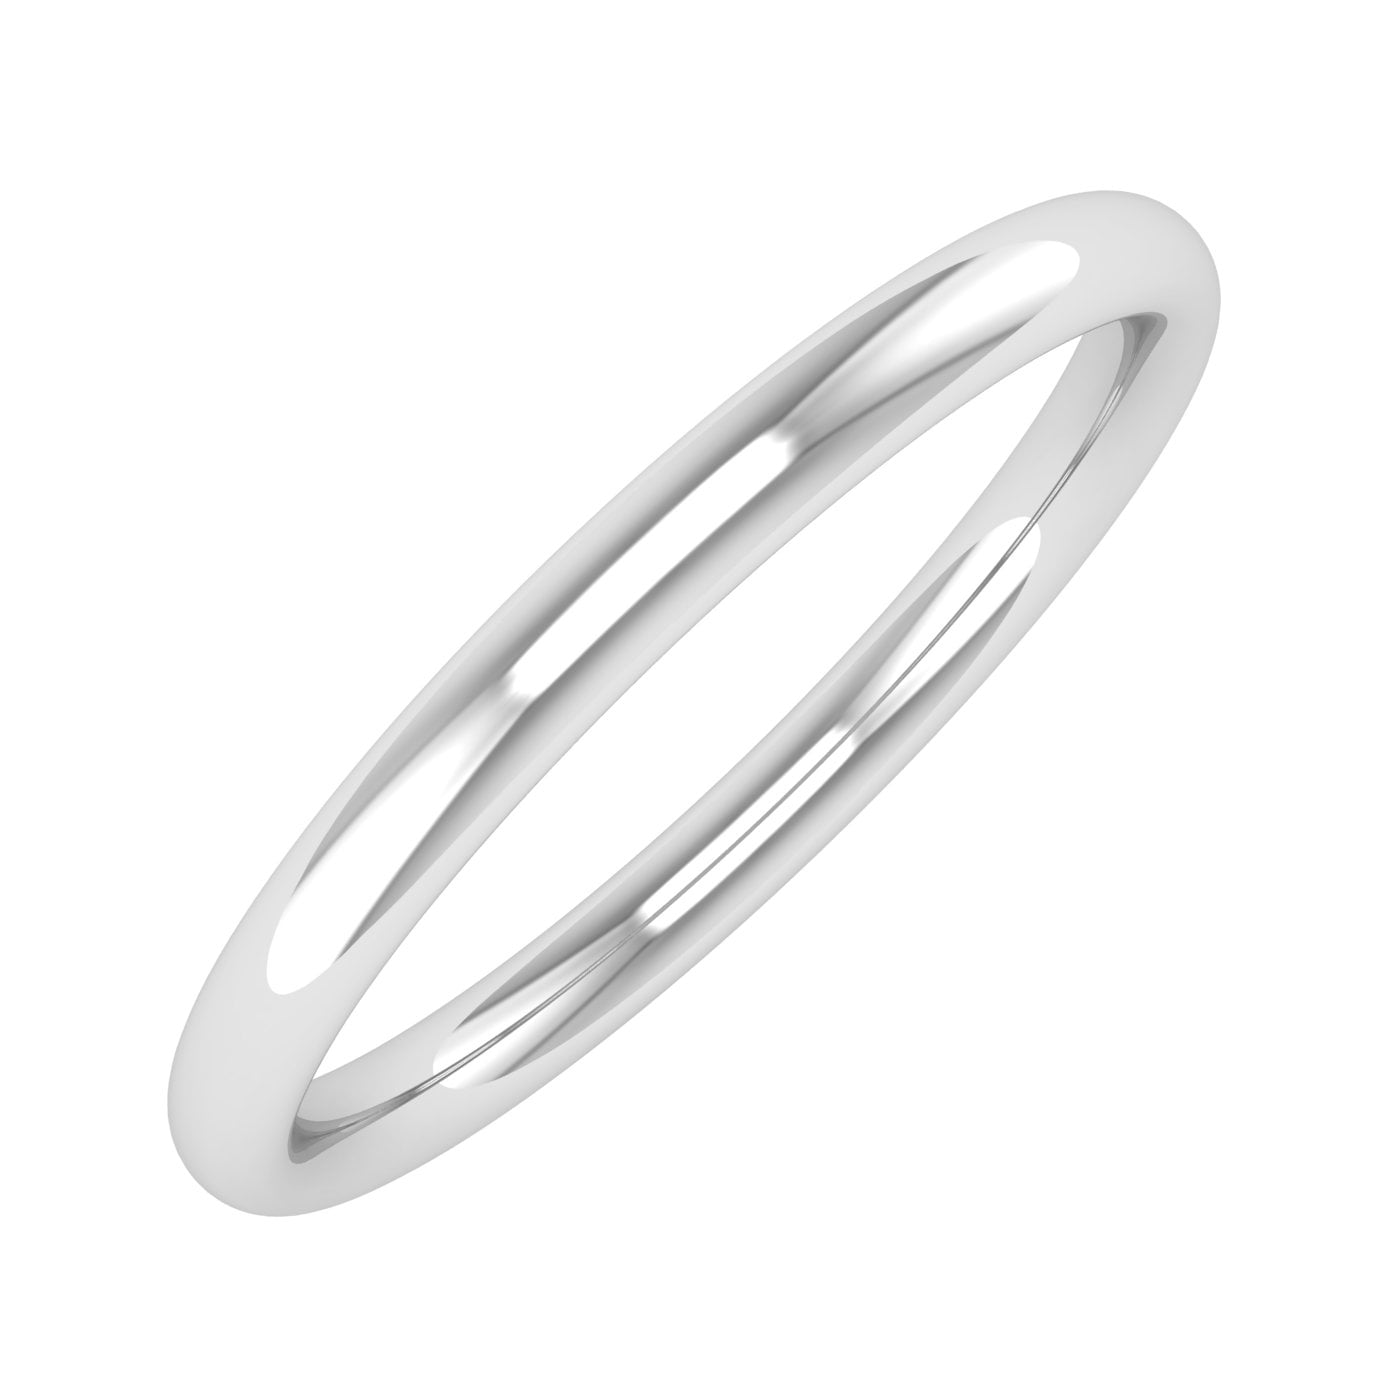 14k White Gold 2mm Flat Comfort Fit Wedding Band Heavy Weight